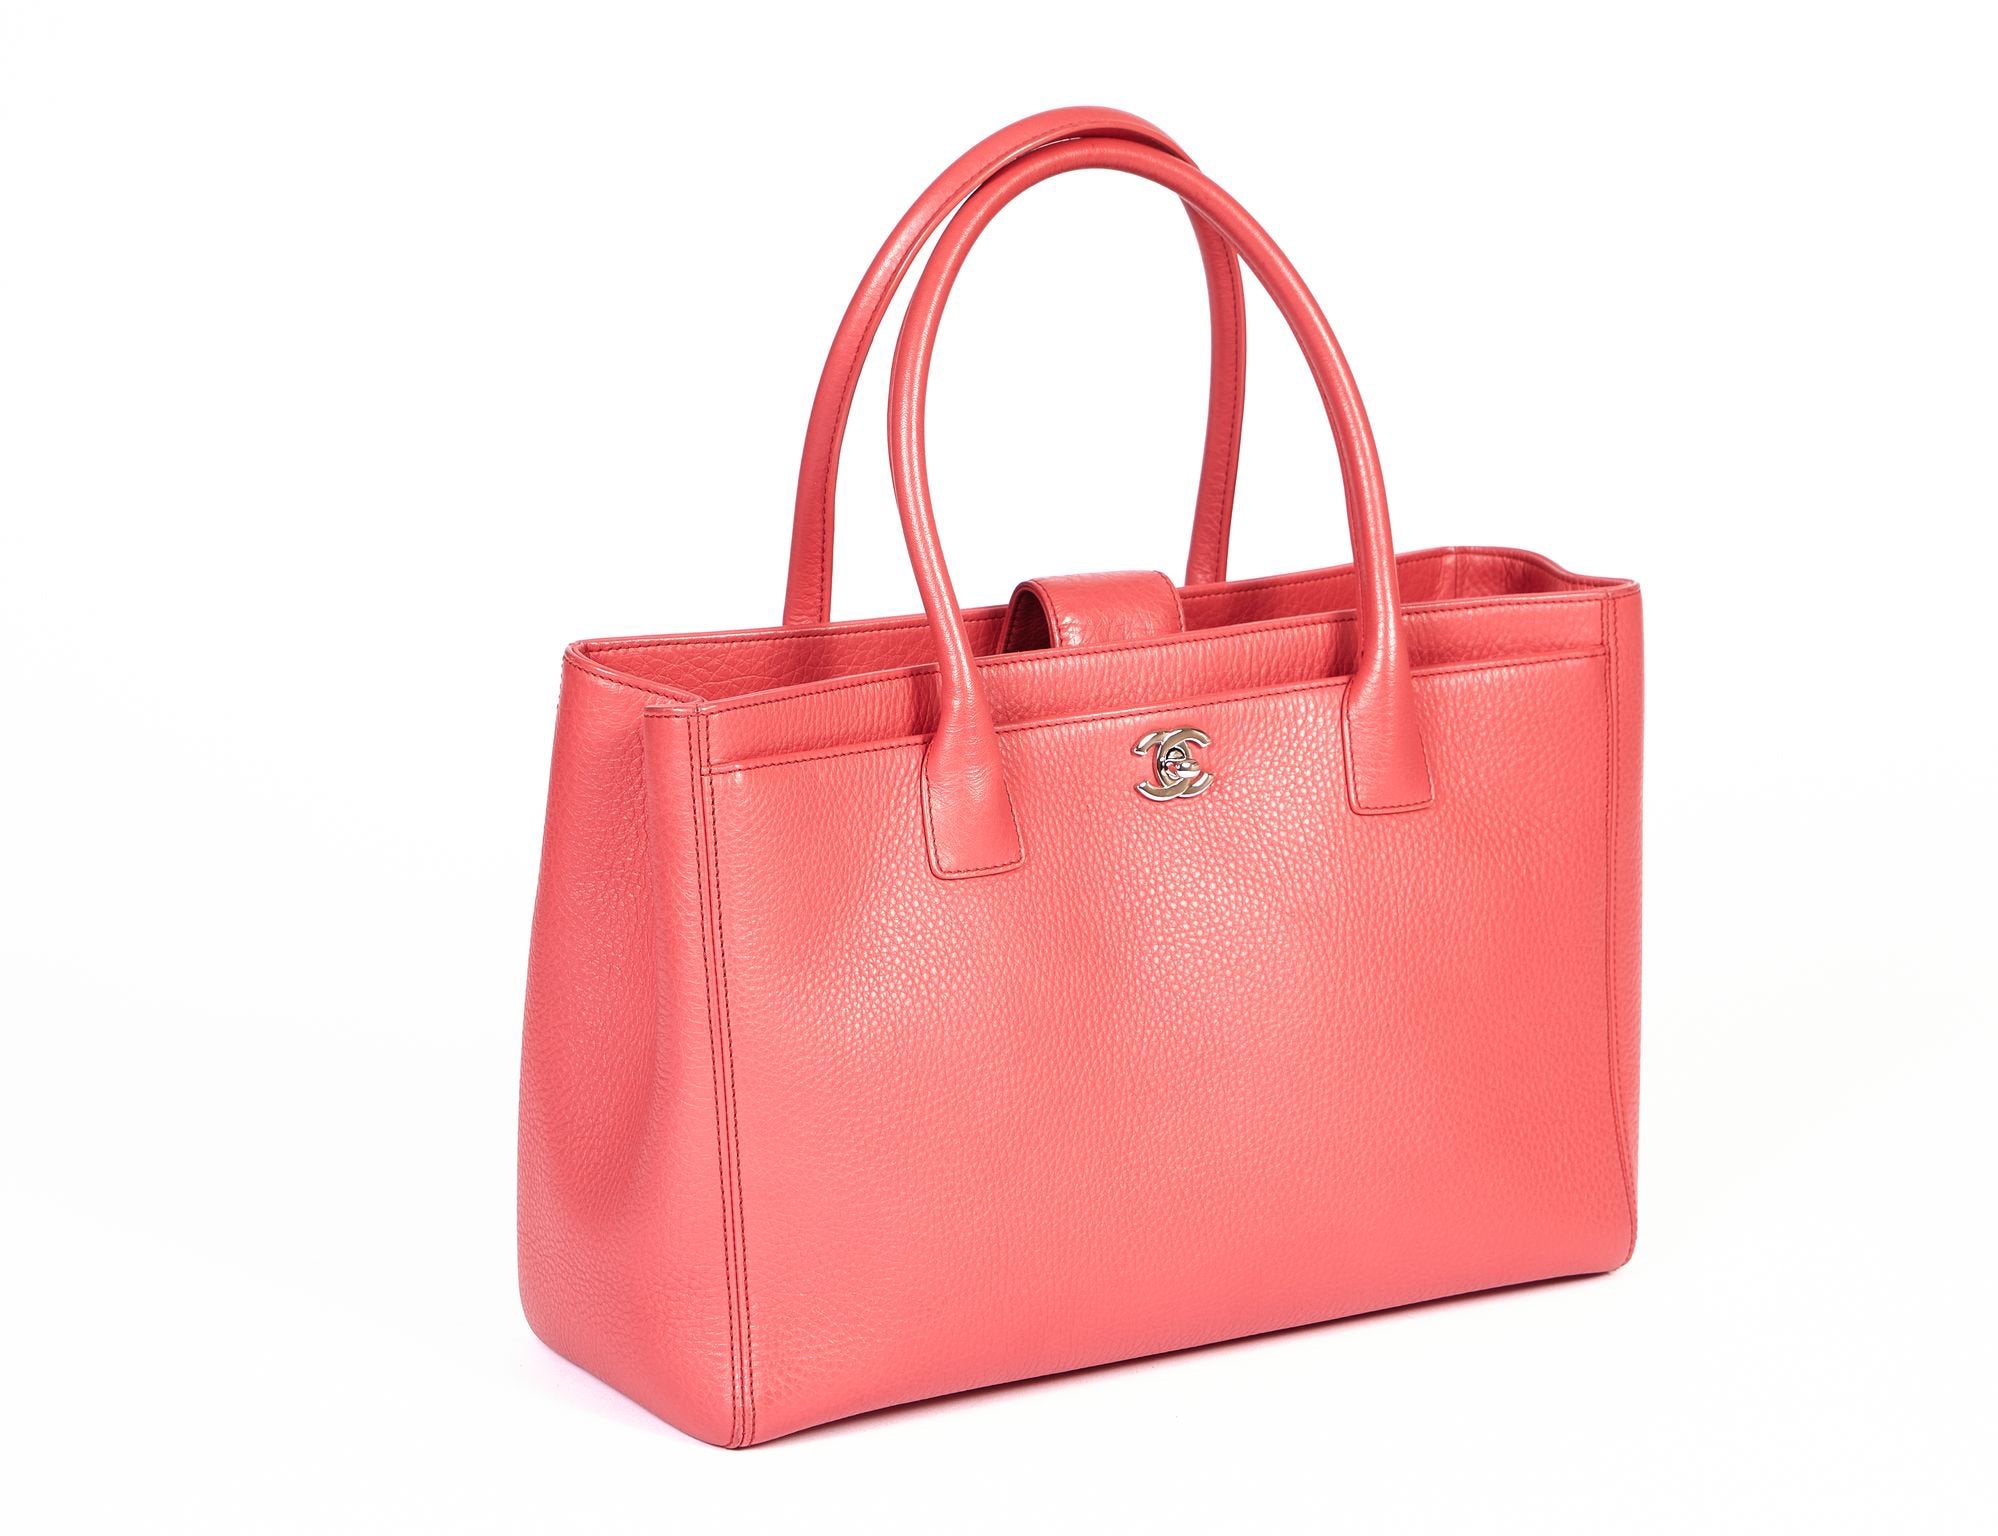 Chanel Oversize Coral Caviar Tote - Vintage Lux